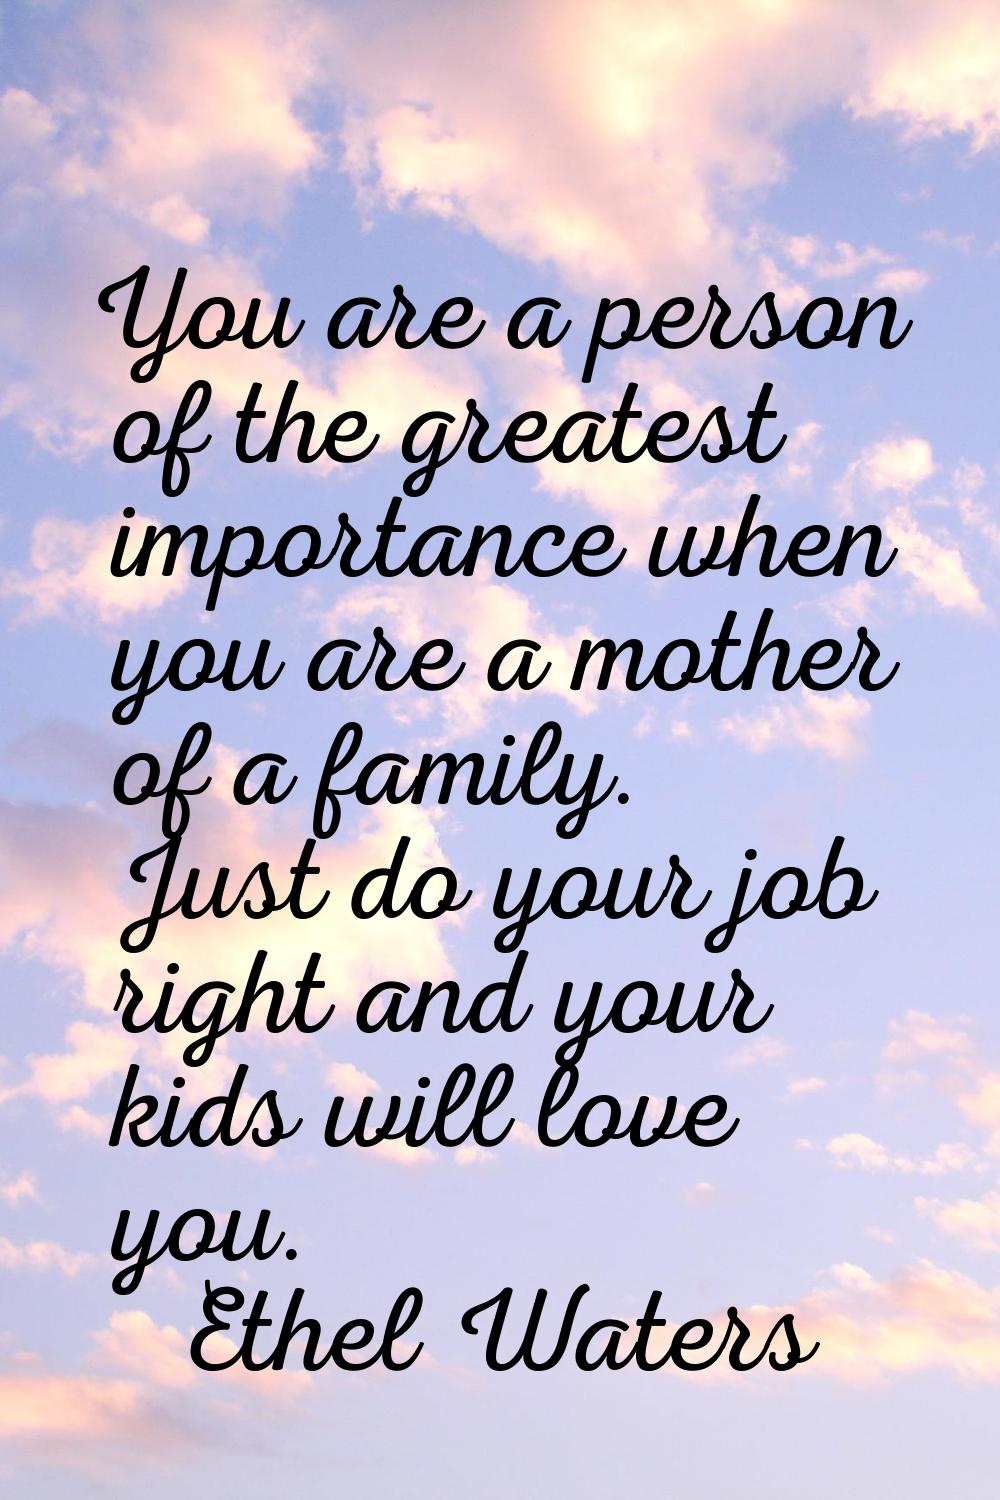 You are a person of the greatest importance when you are a mother of a family. Just do your job rig